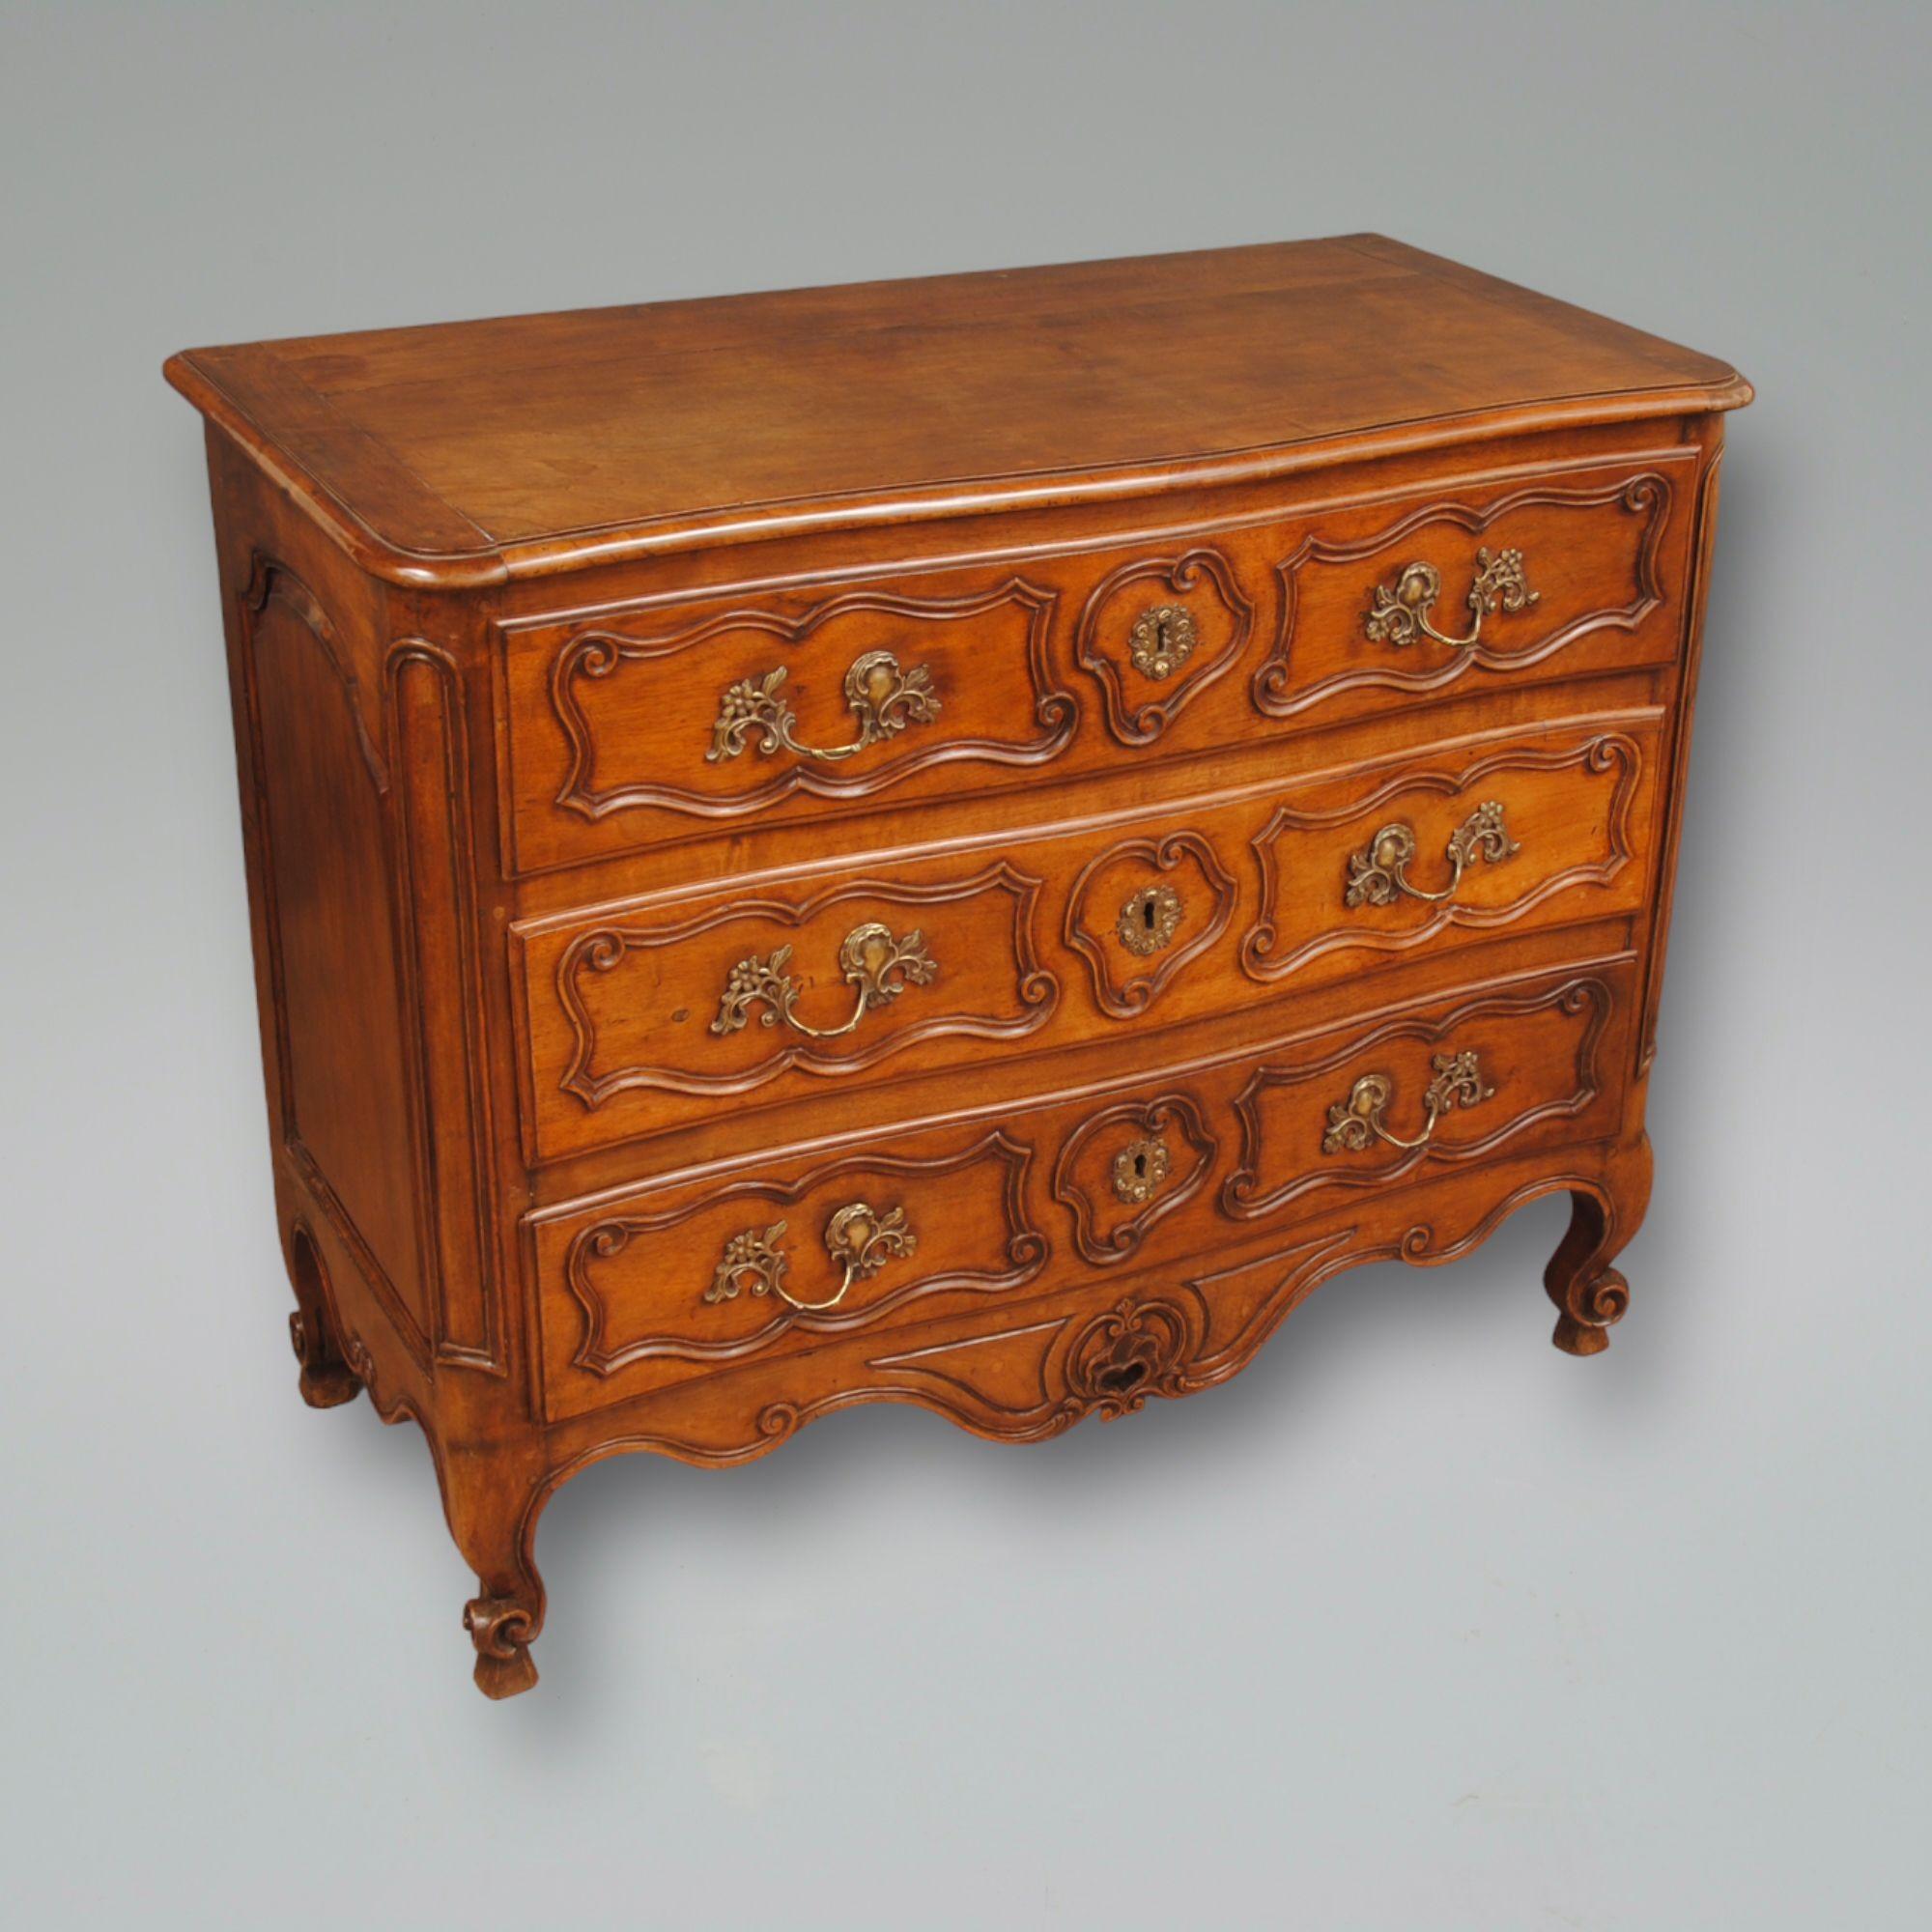 A good example of a carved french walnut commode with a slight bow fronted design, paneled to the ends and with french scroll feet. original handles and good colour and condition throughout.
Circa 1770